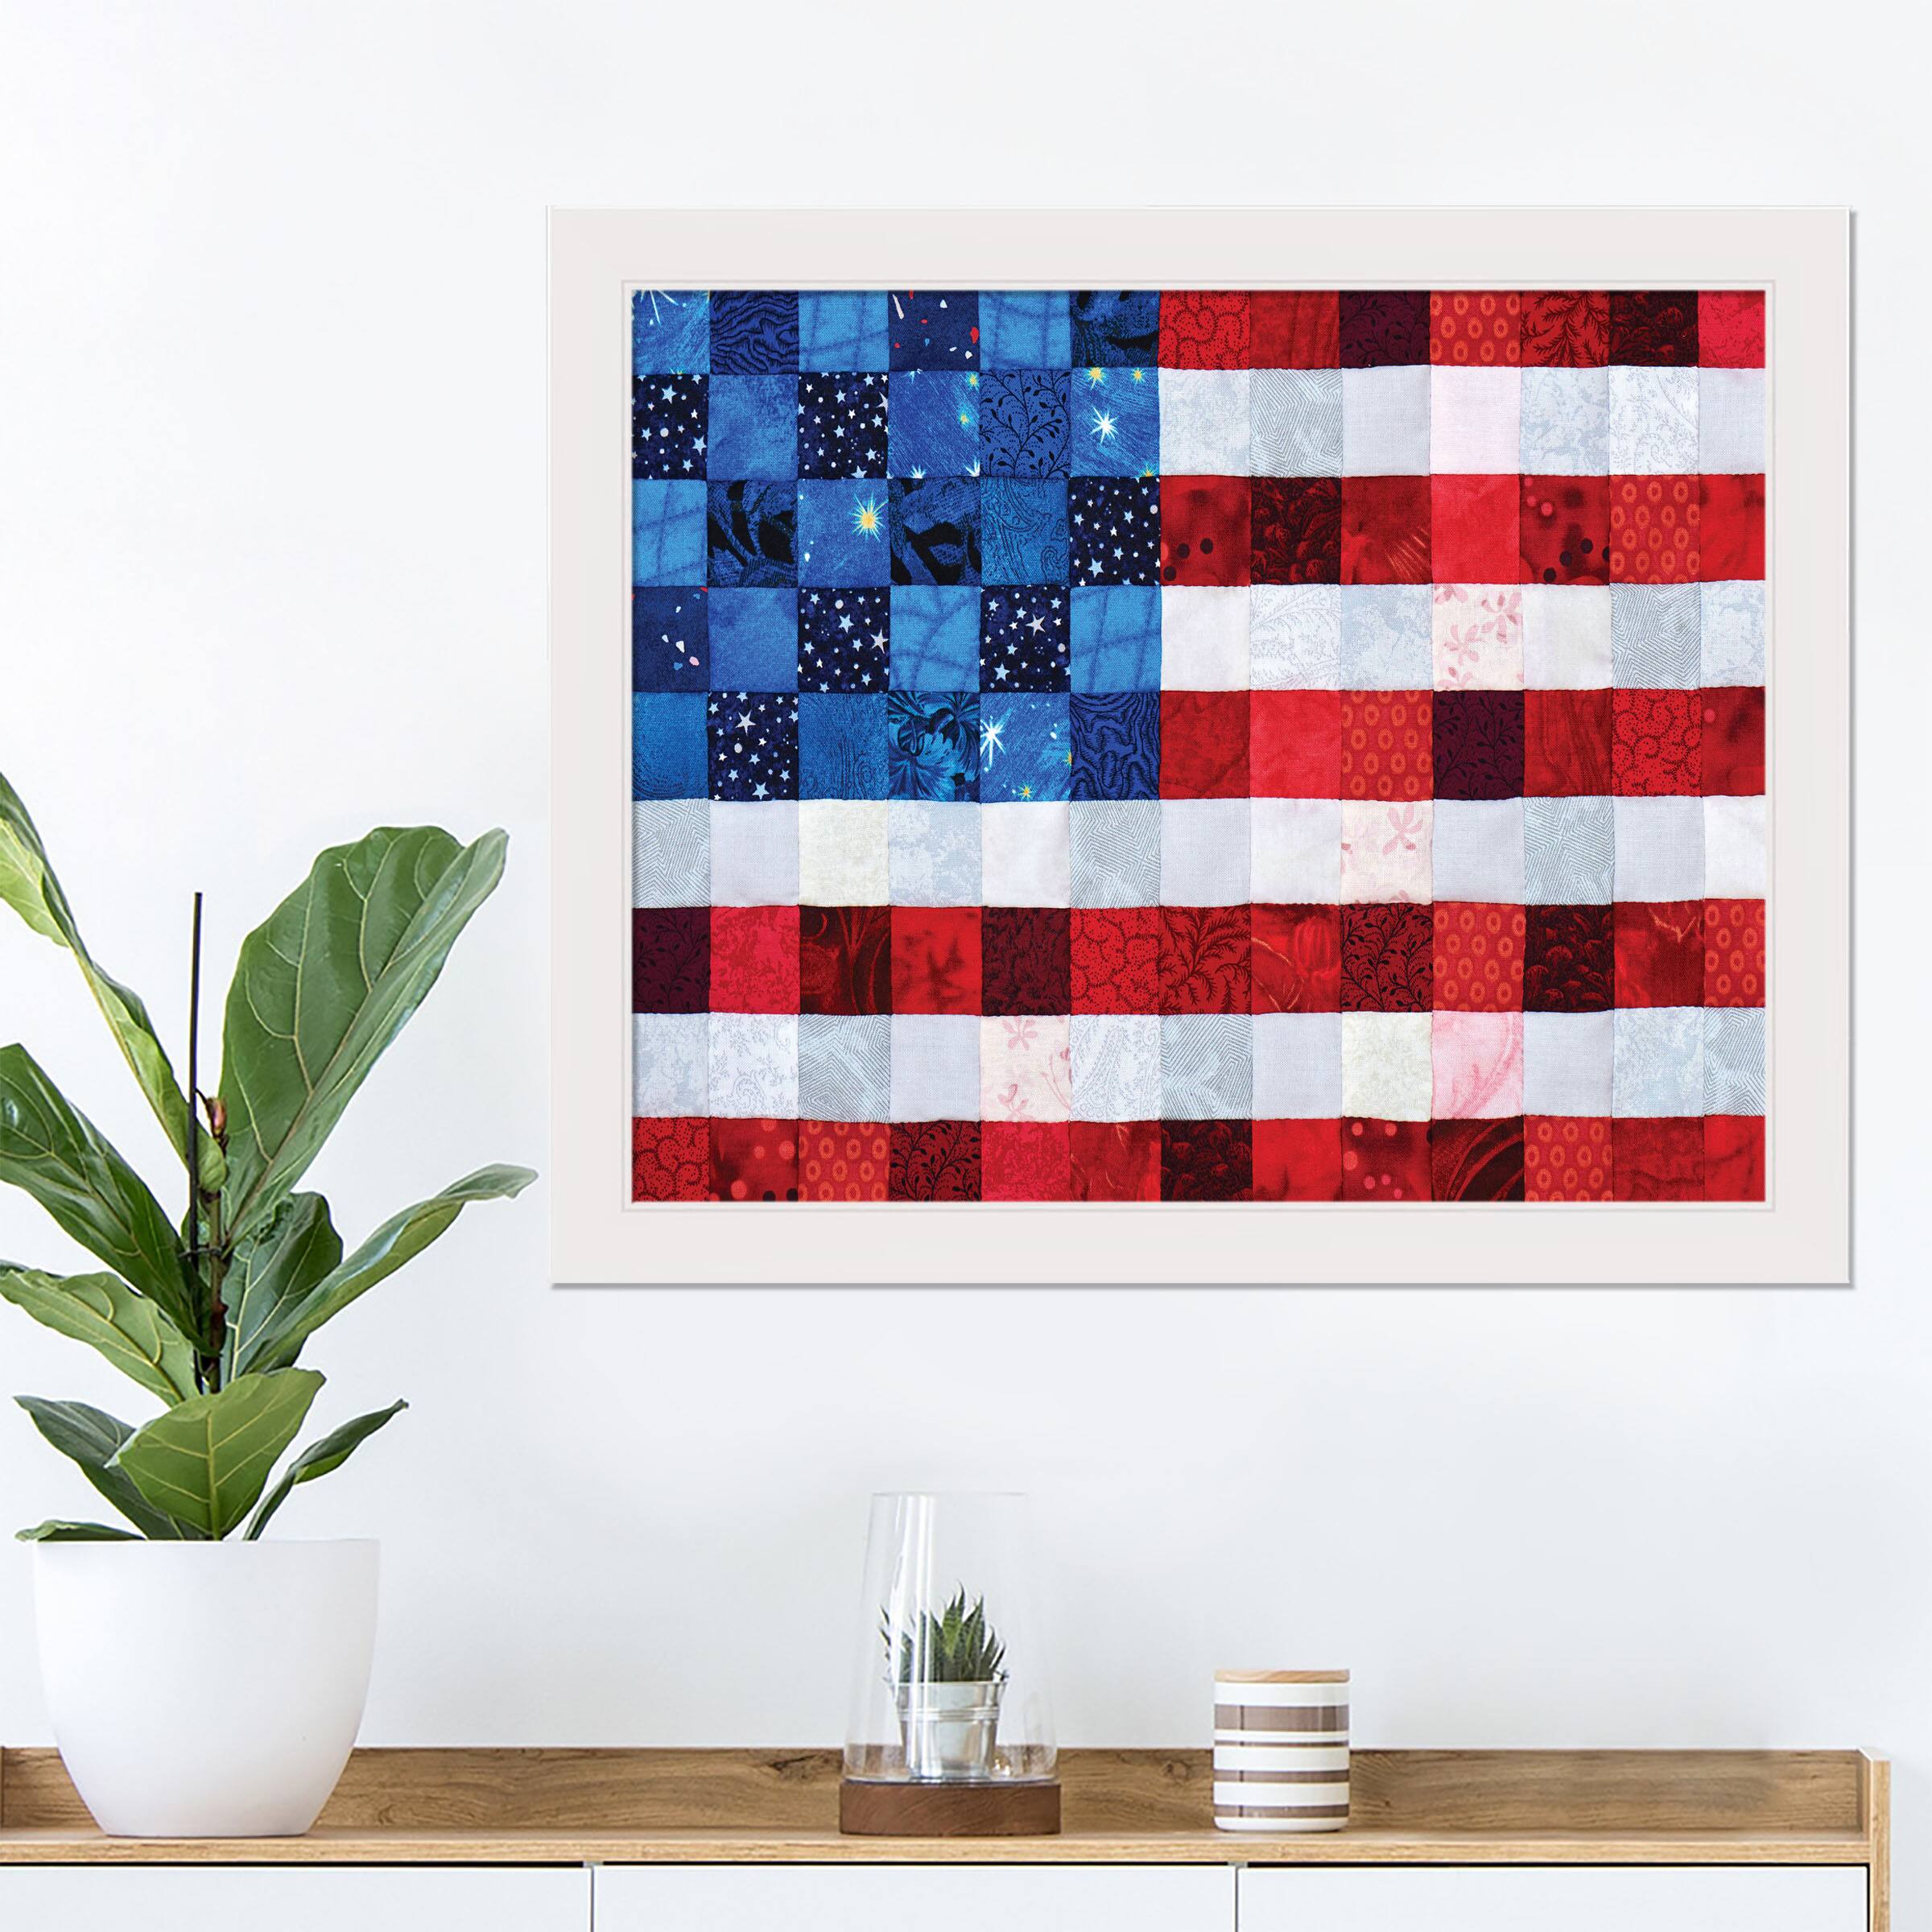 5 BEAUTIFUL QUALITY PATRIOTIC FLAG QUILT BLANK NOTE CARDS Shipped USA FAST! 